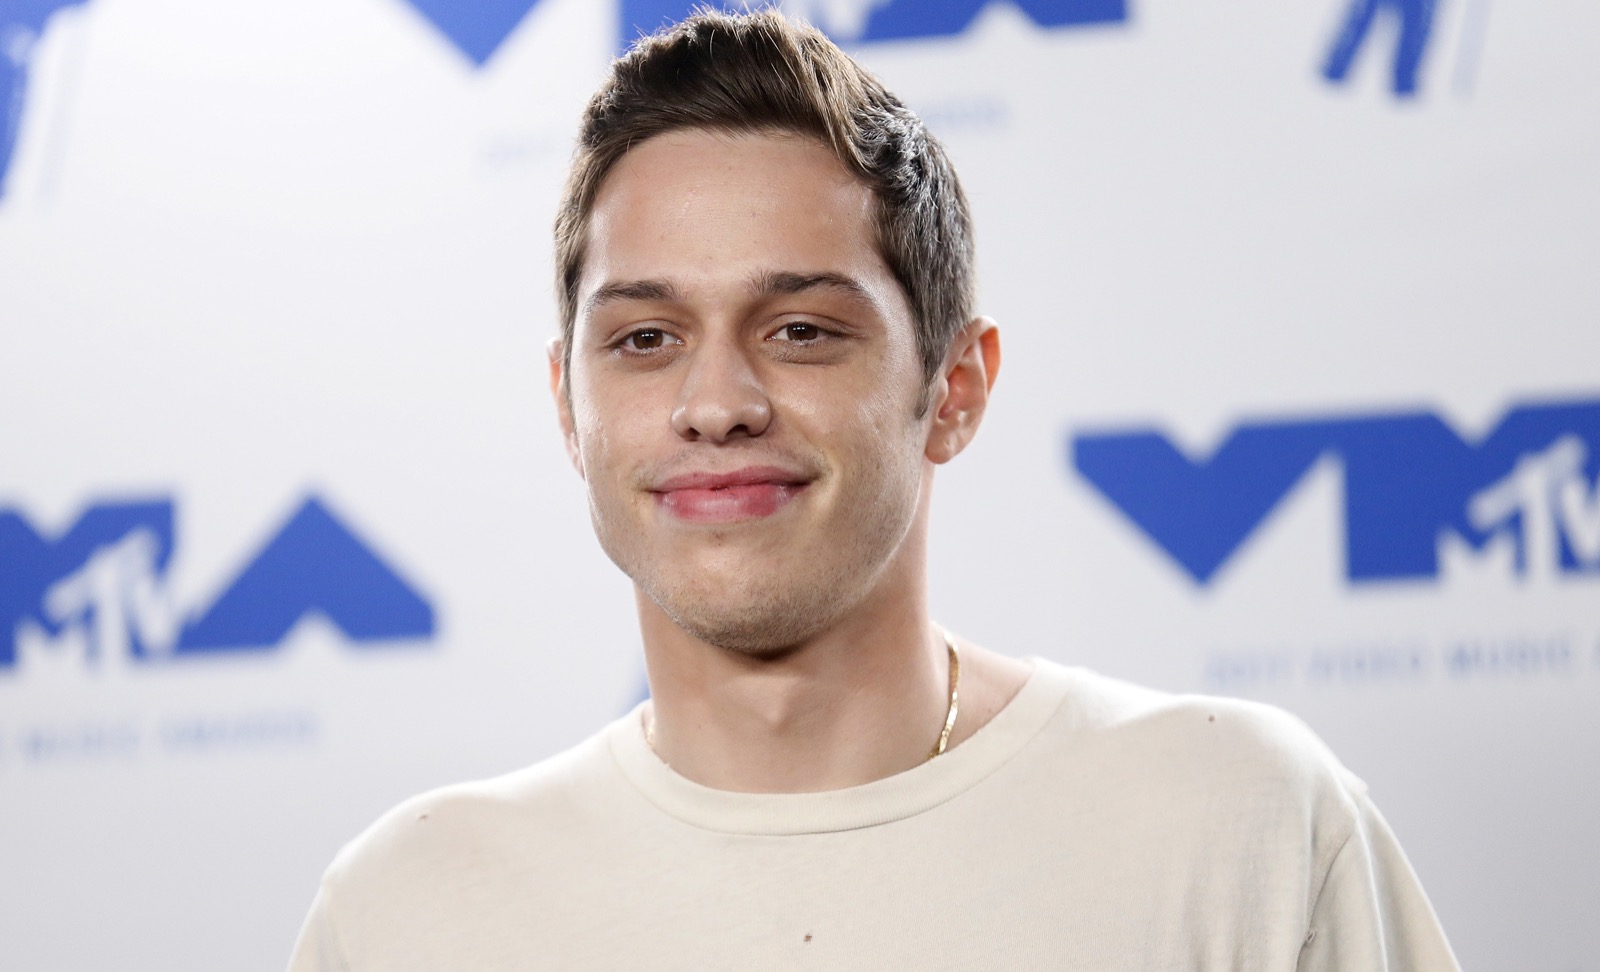 It’s Time to Decide If These Popular Male Celebrities Are Attractive or Not Pete Davidson